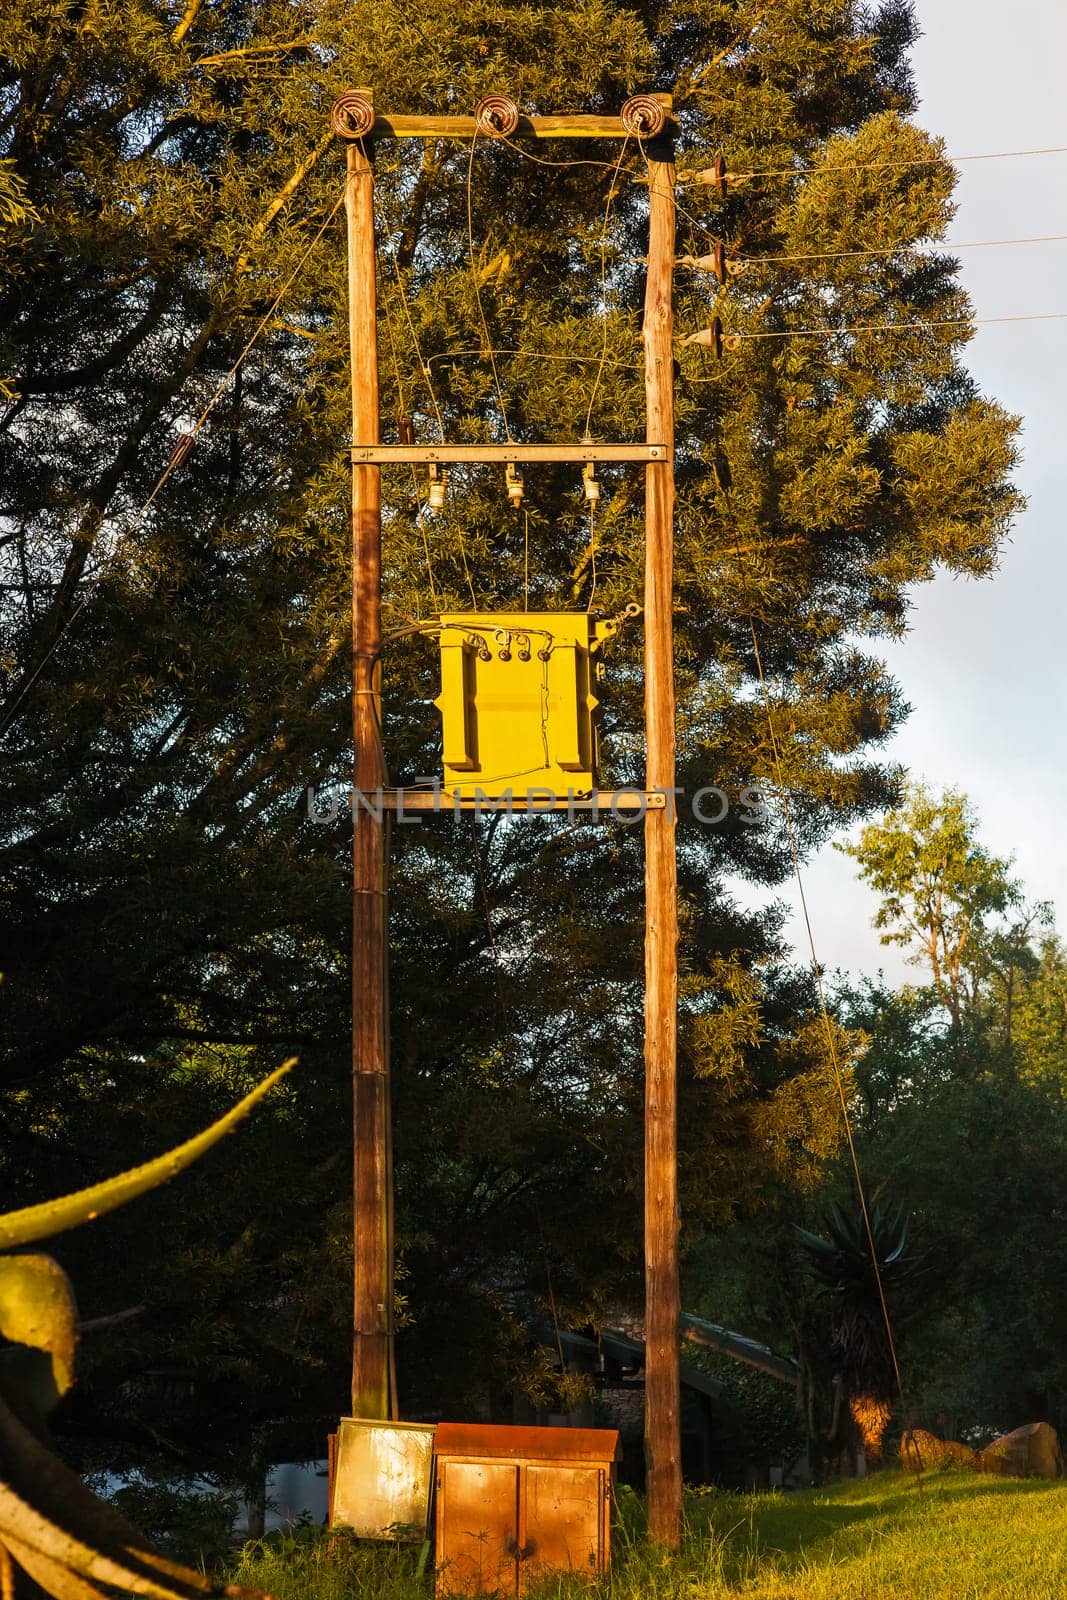 Overhead electrical distribution line with a transformer box on double wooden poles.